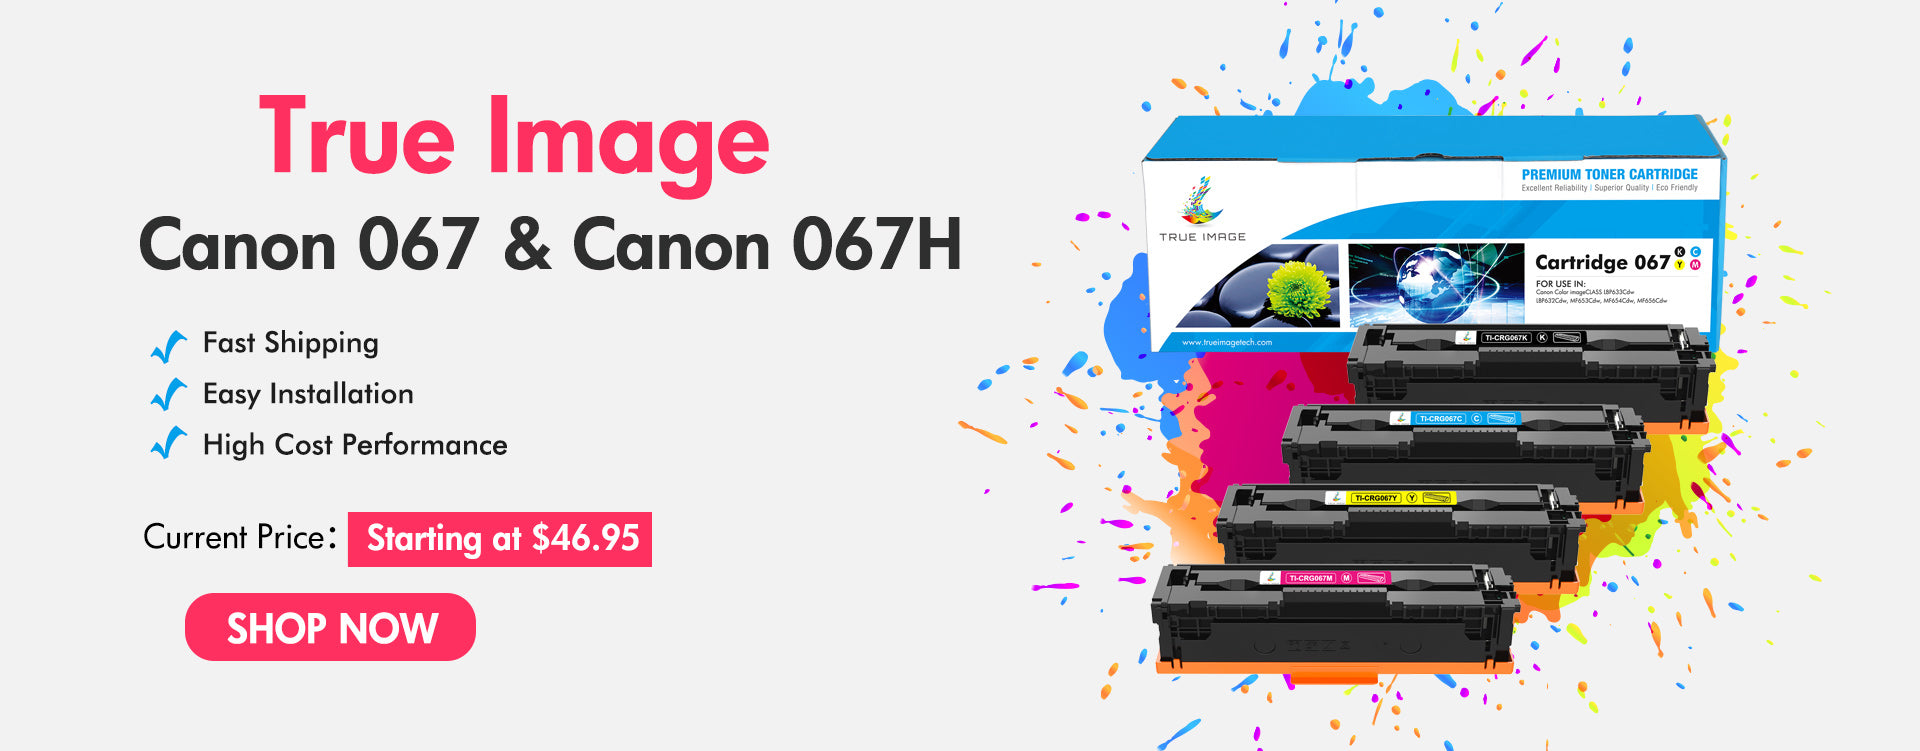 Canon 067 and Canon 067H